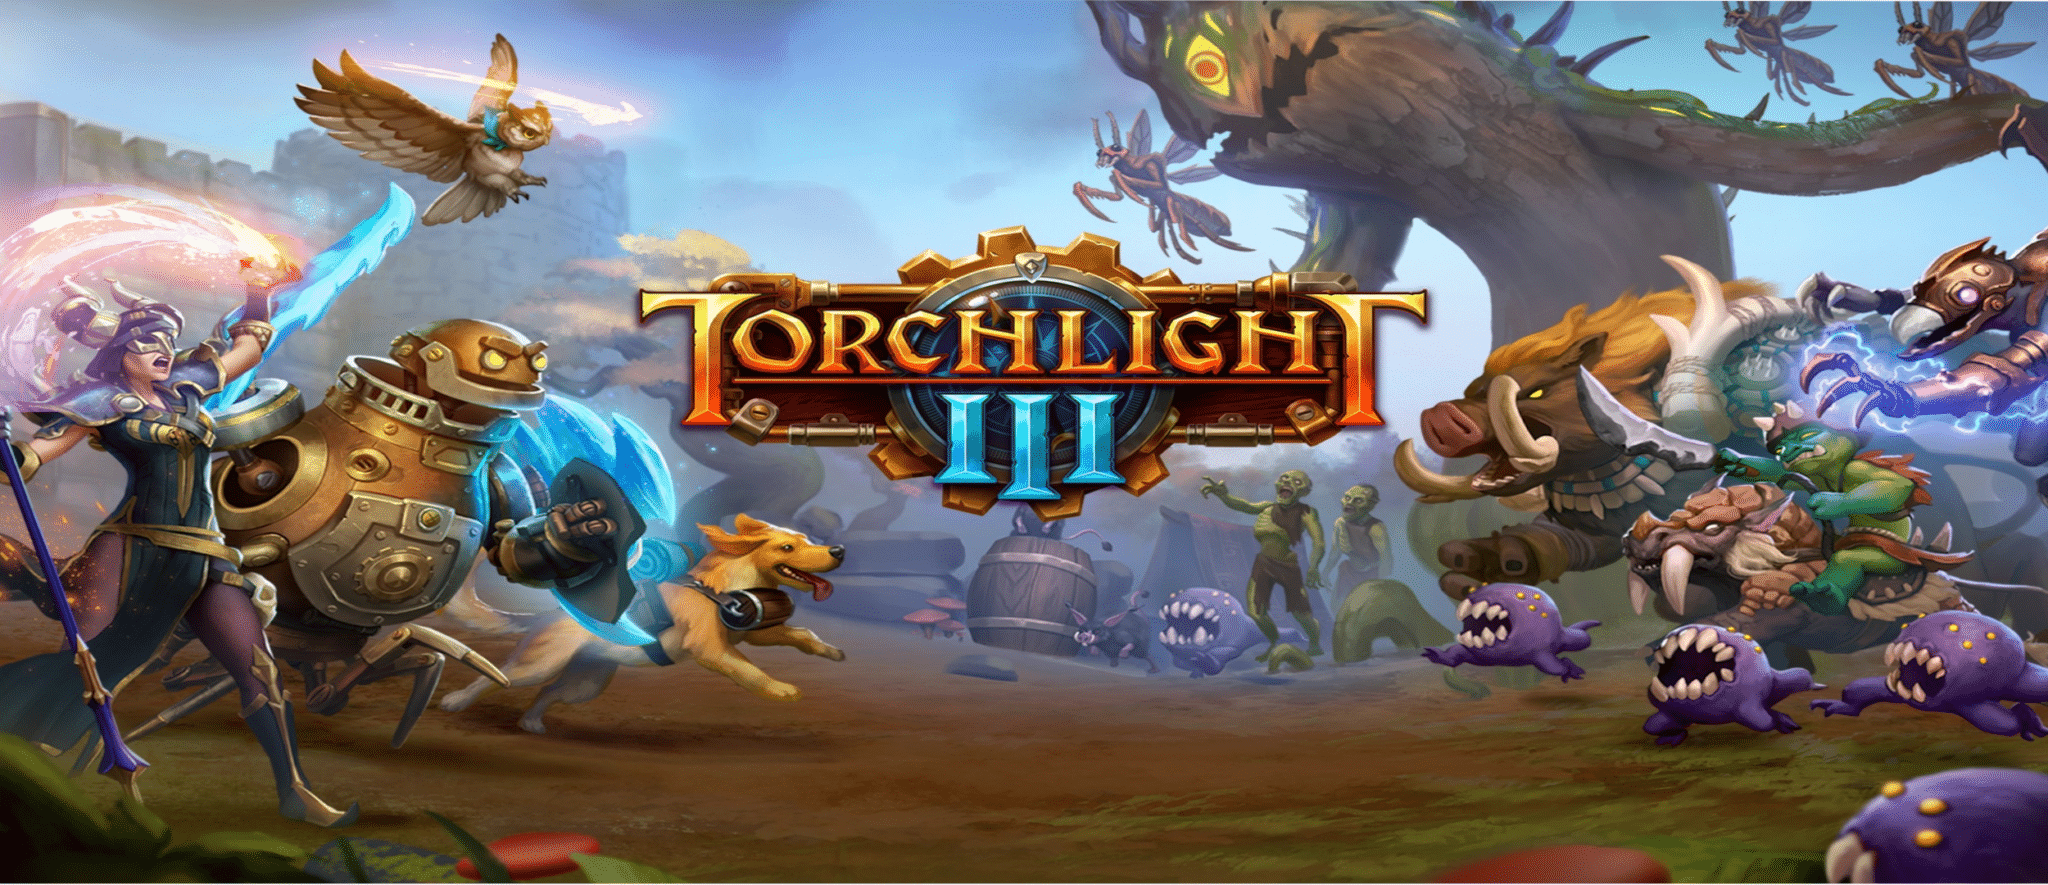 Torchlight 3 Launches With Console-based Exclusive Fairy Pets